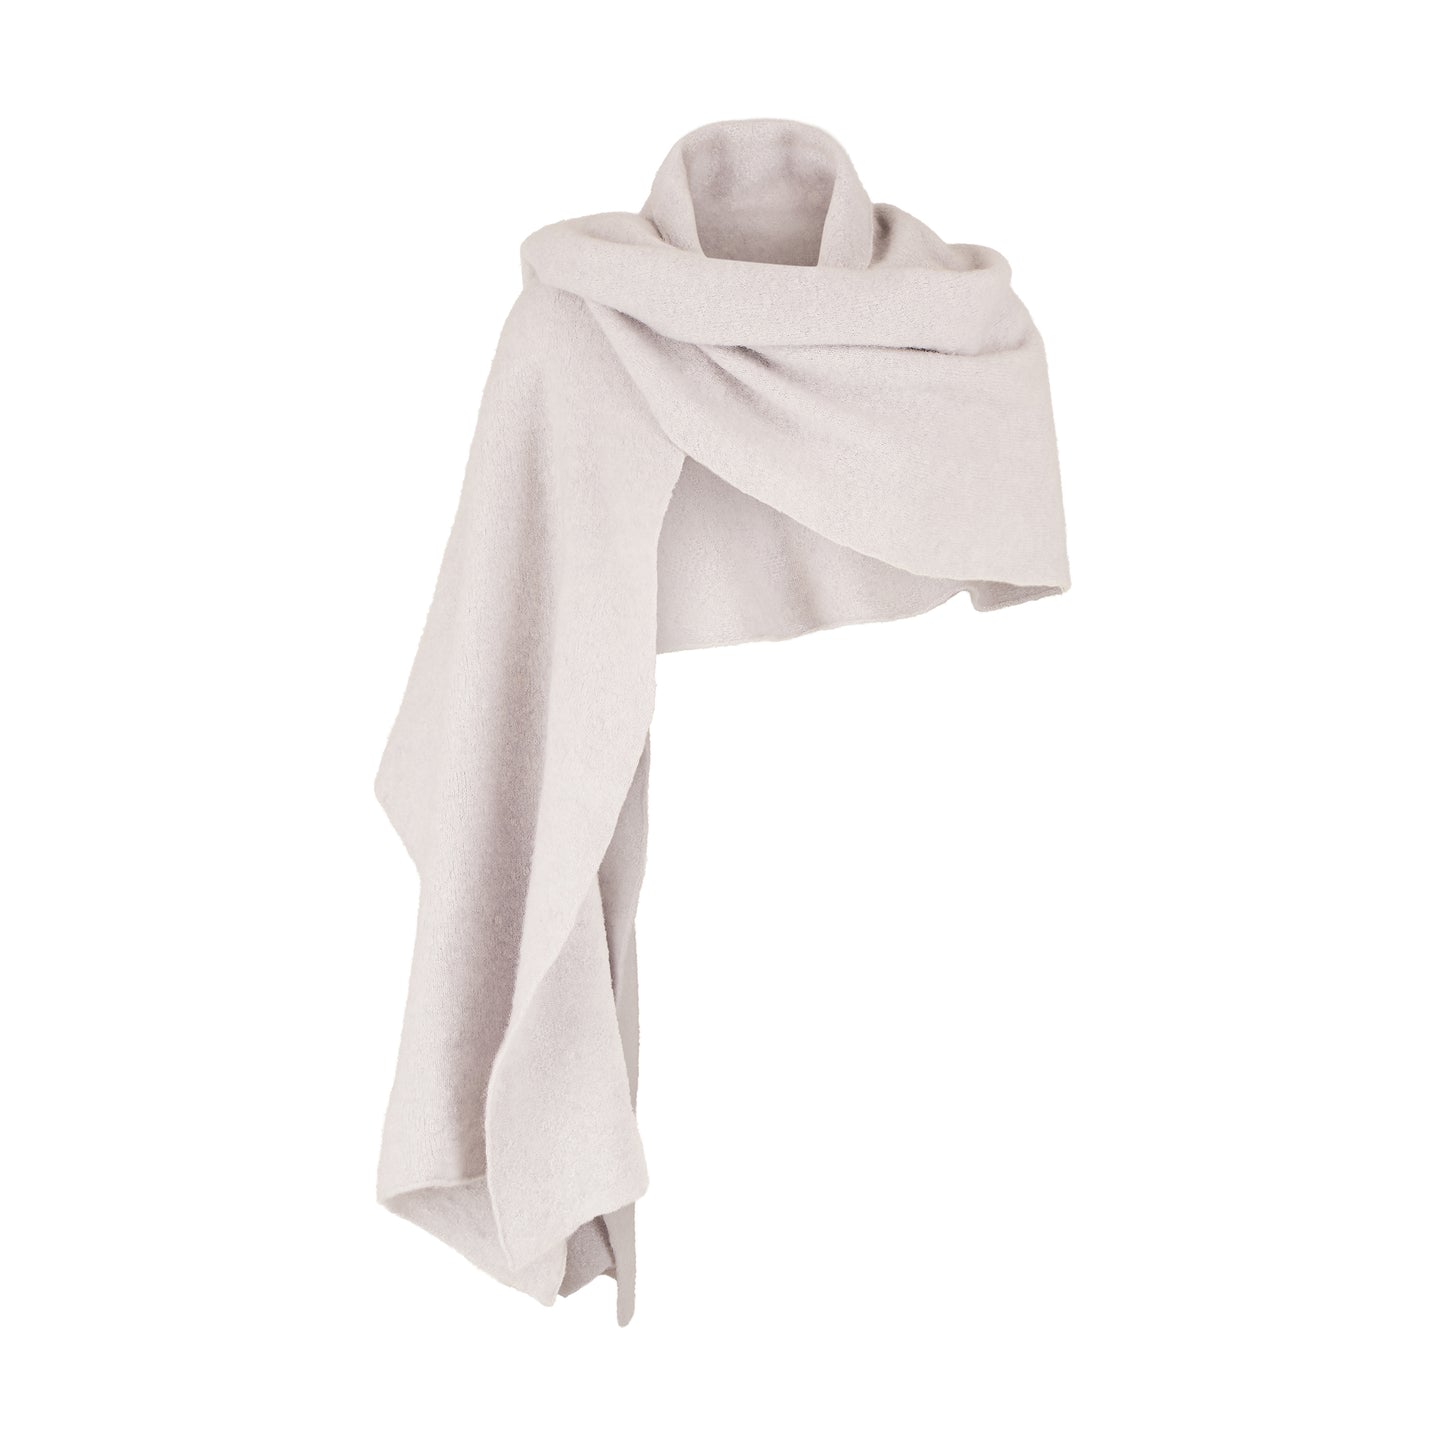 Large textured 100% Cashmere wrap made in Ireland 